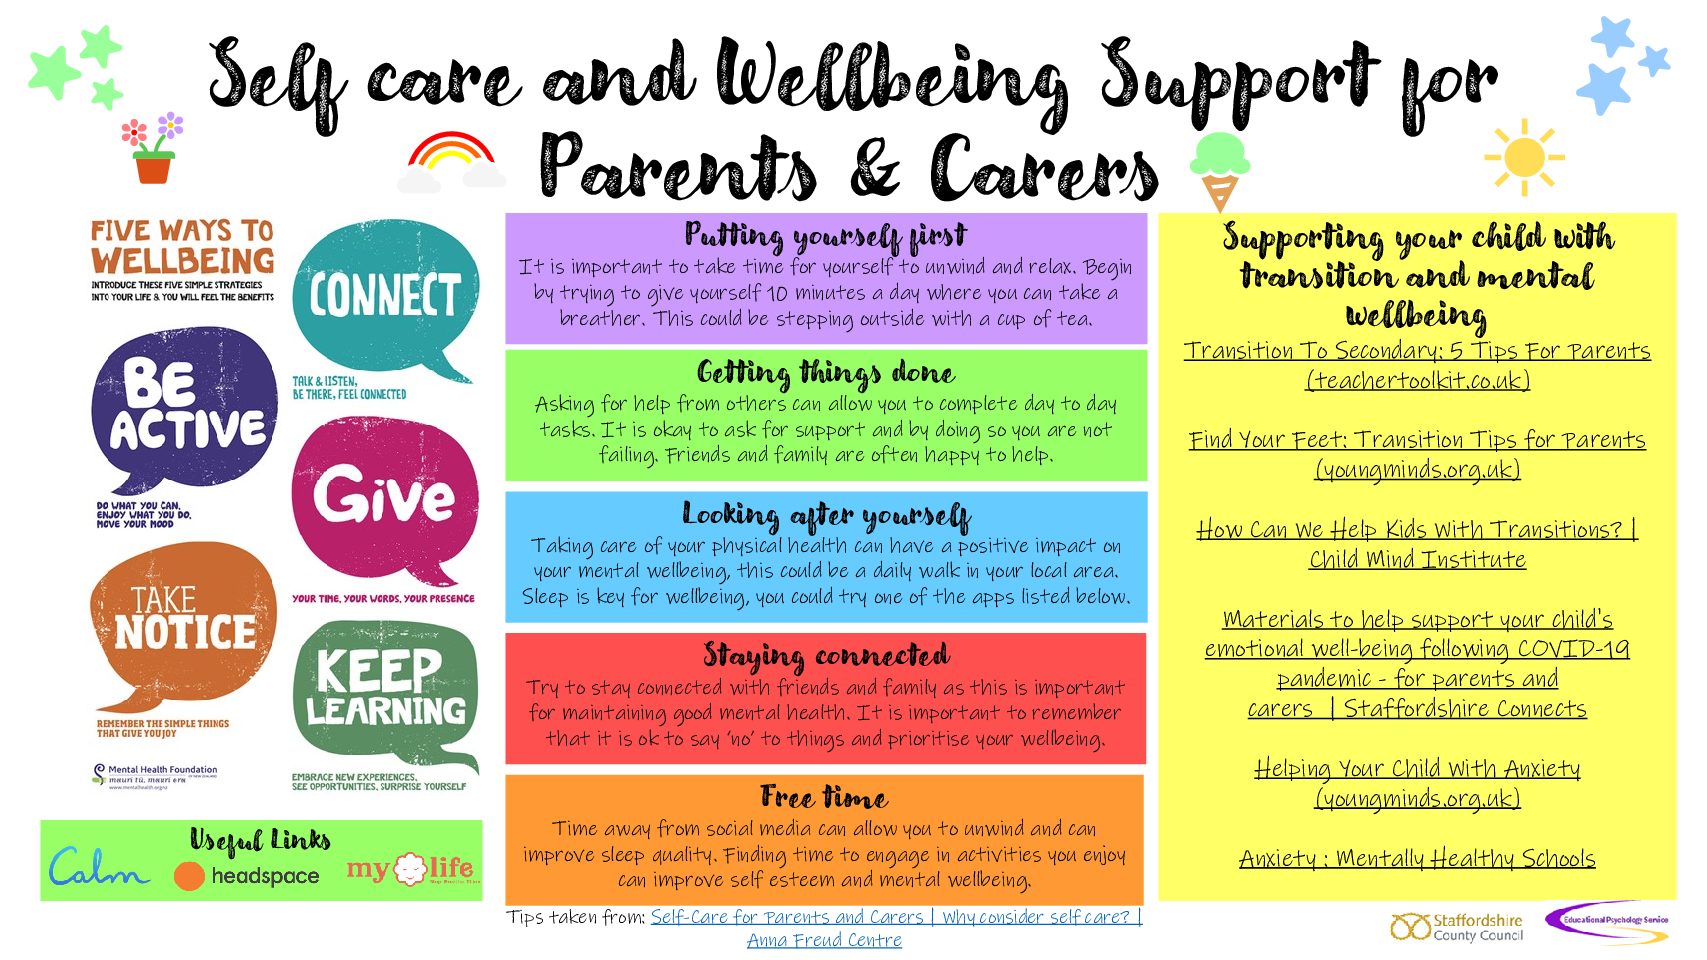 Self Care and Wellbeing Support for Parents and Carers